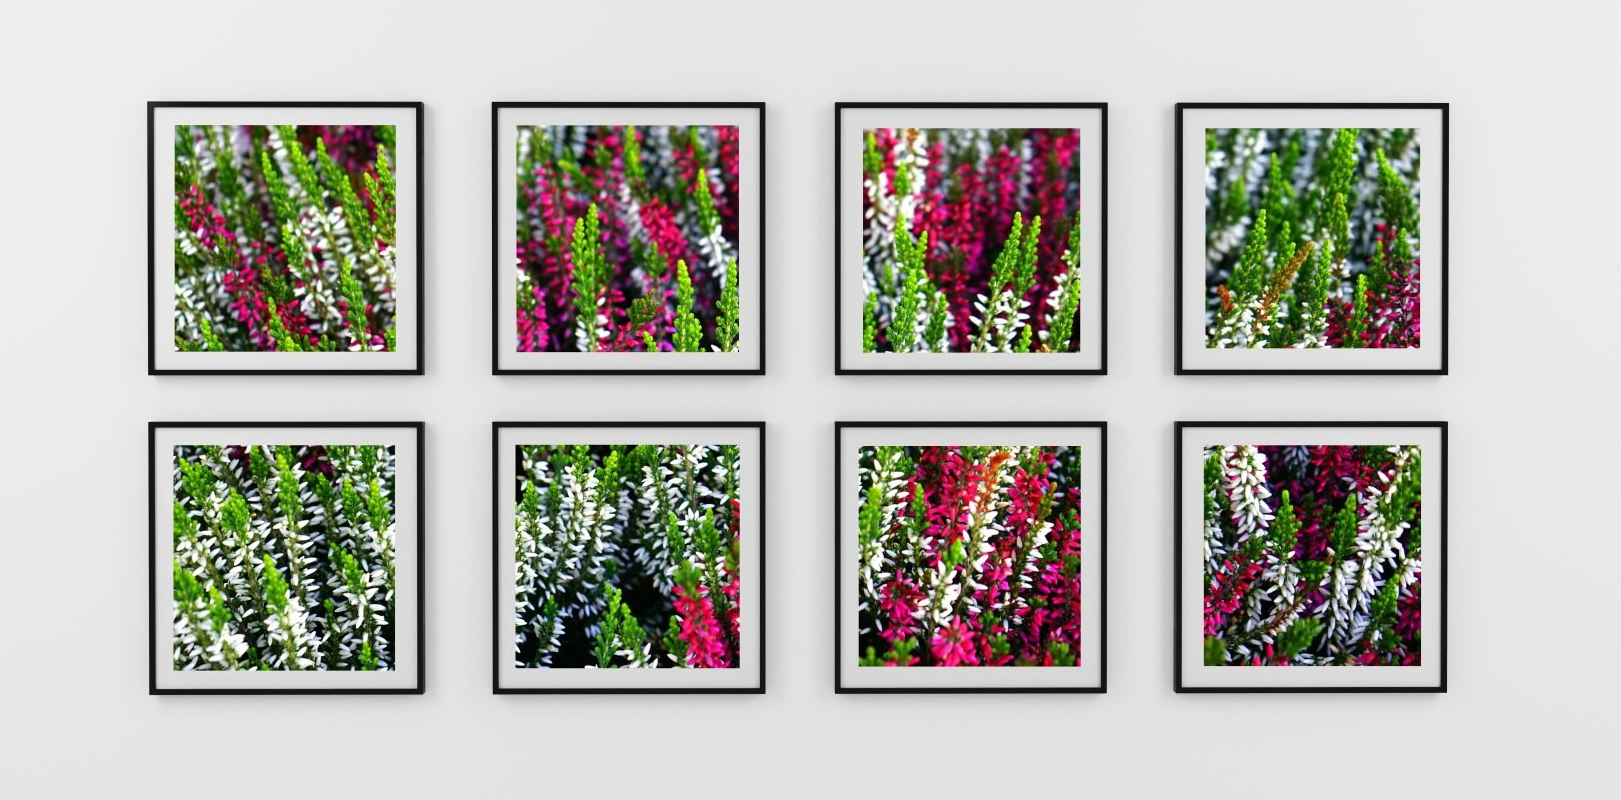 Photographs of flowers displayed in art gallery